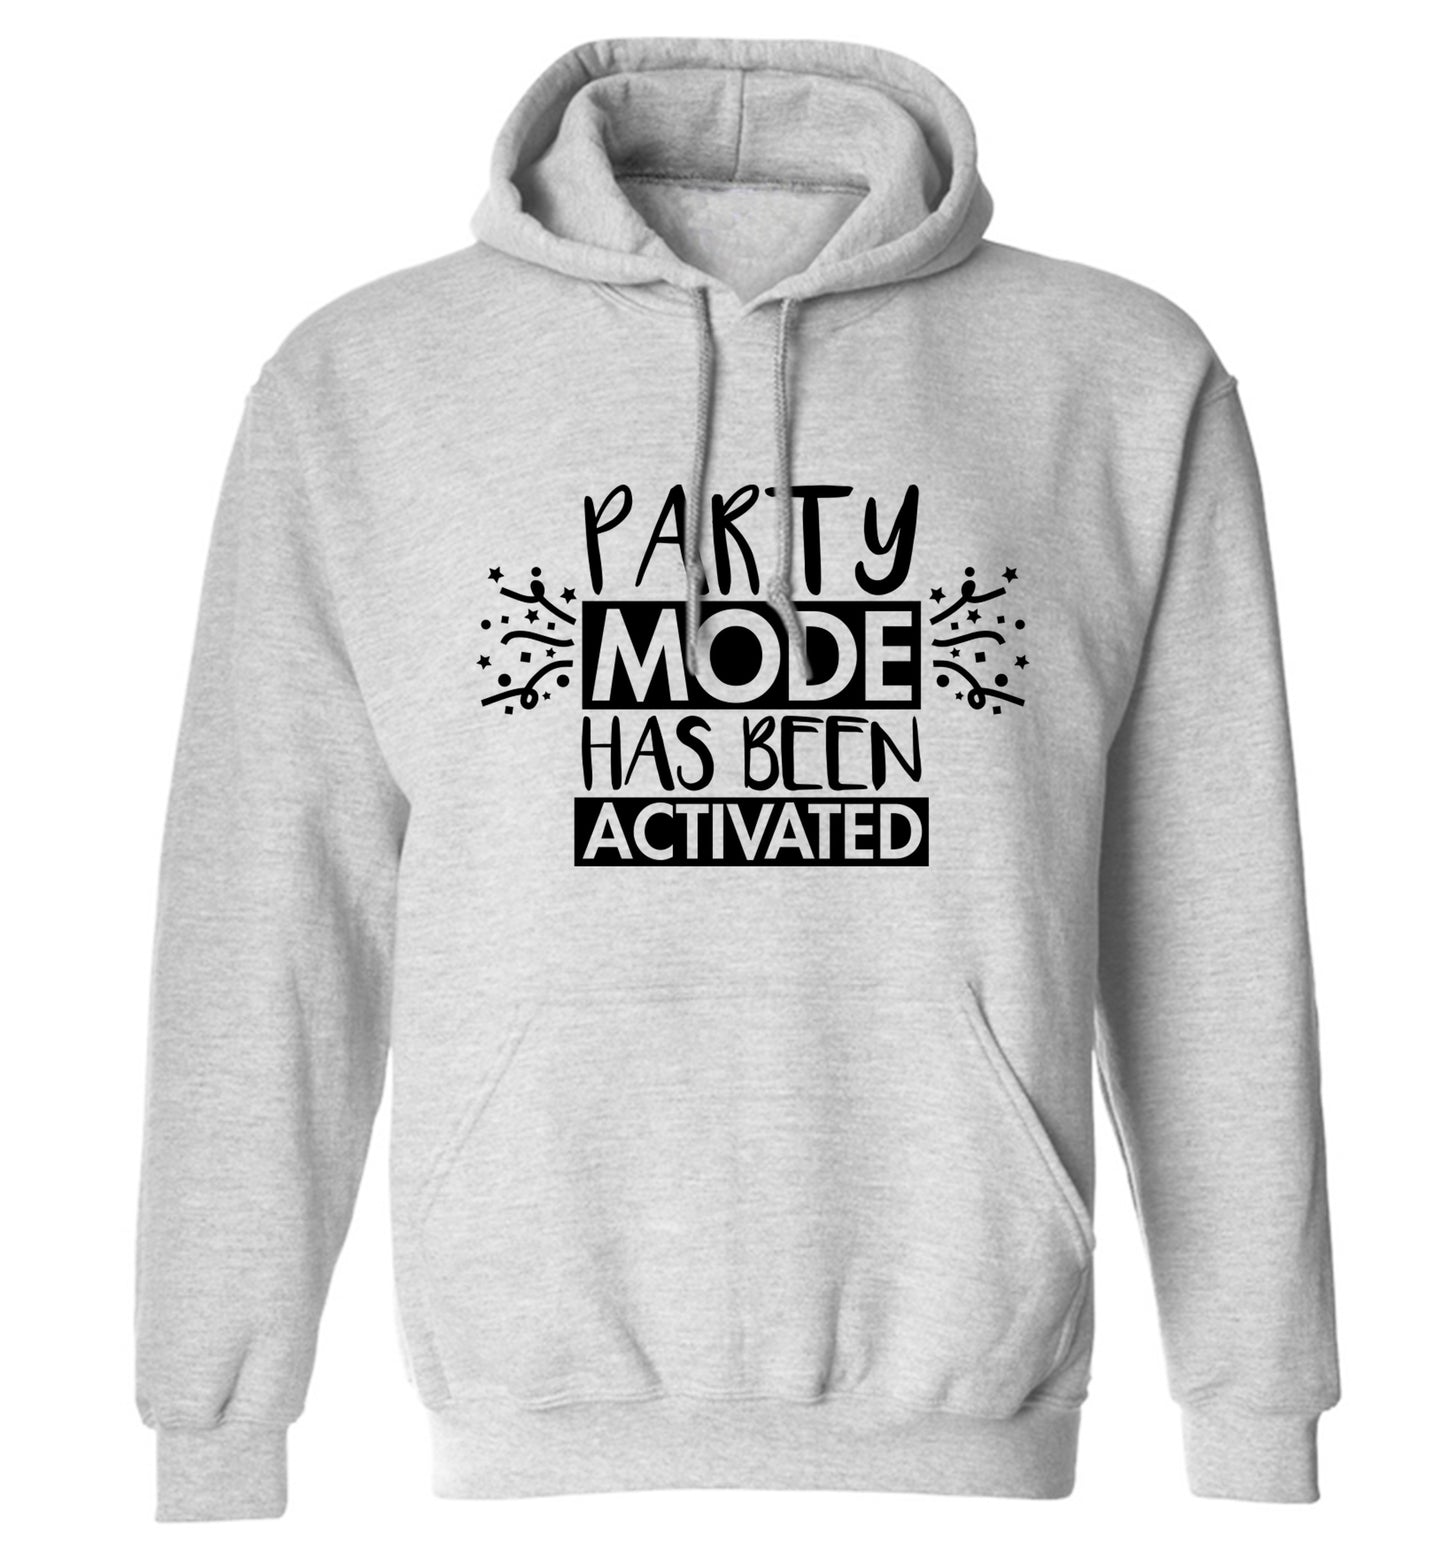 Please do not disturb party mode has been activated adults unisex grey hoodie 2XL